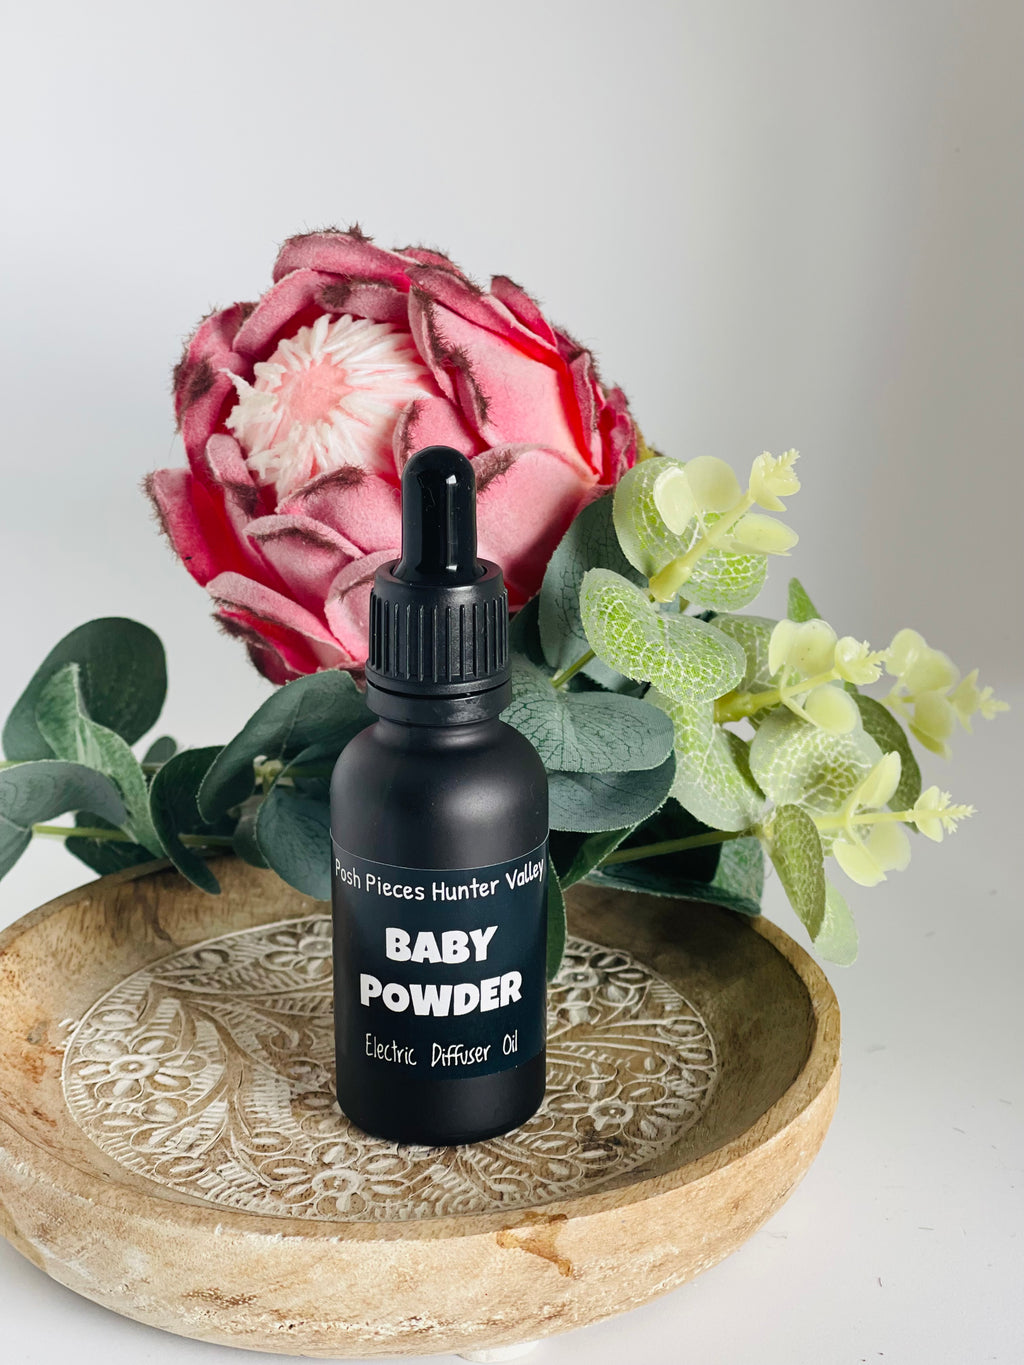 Baby Powder electric diffuser oil